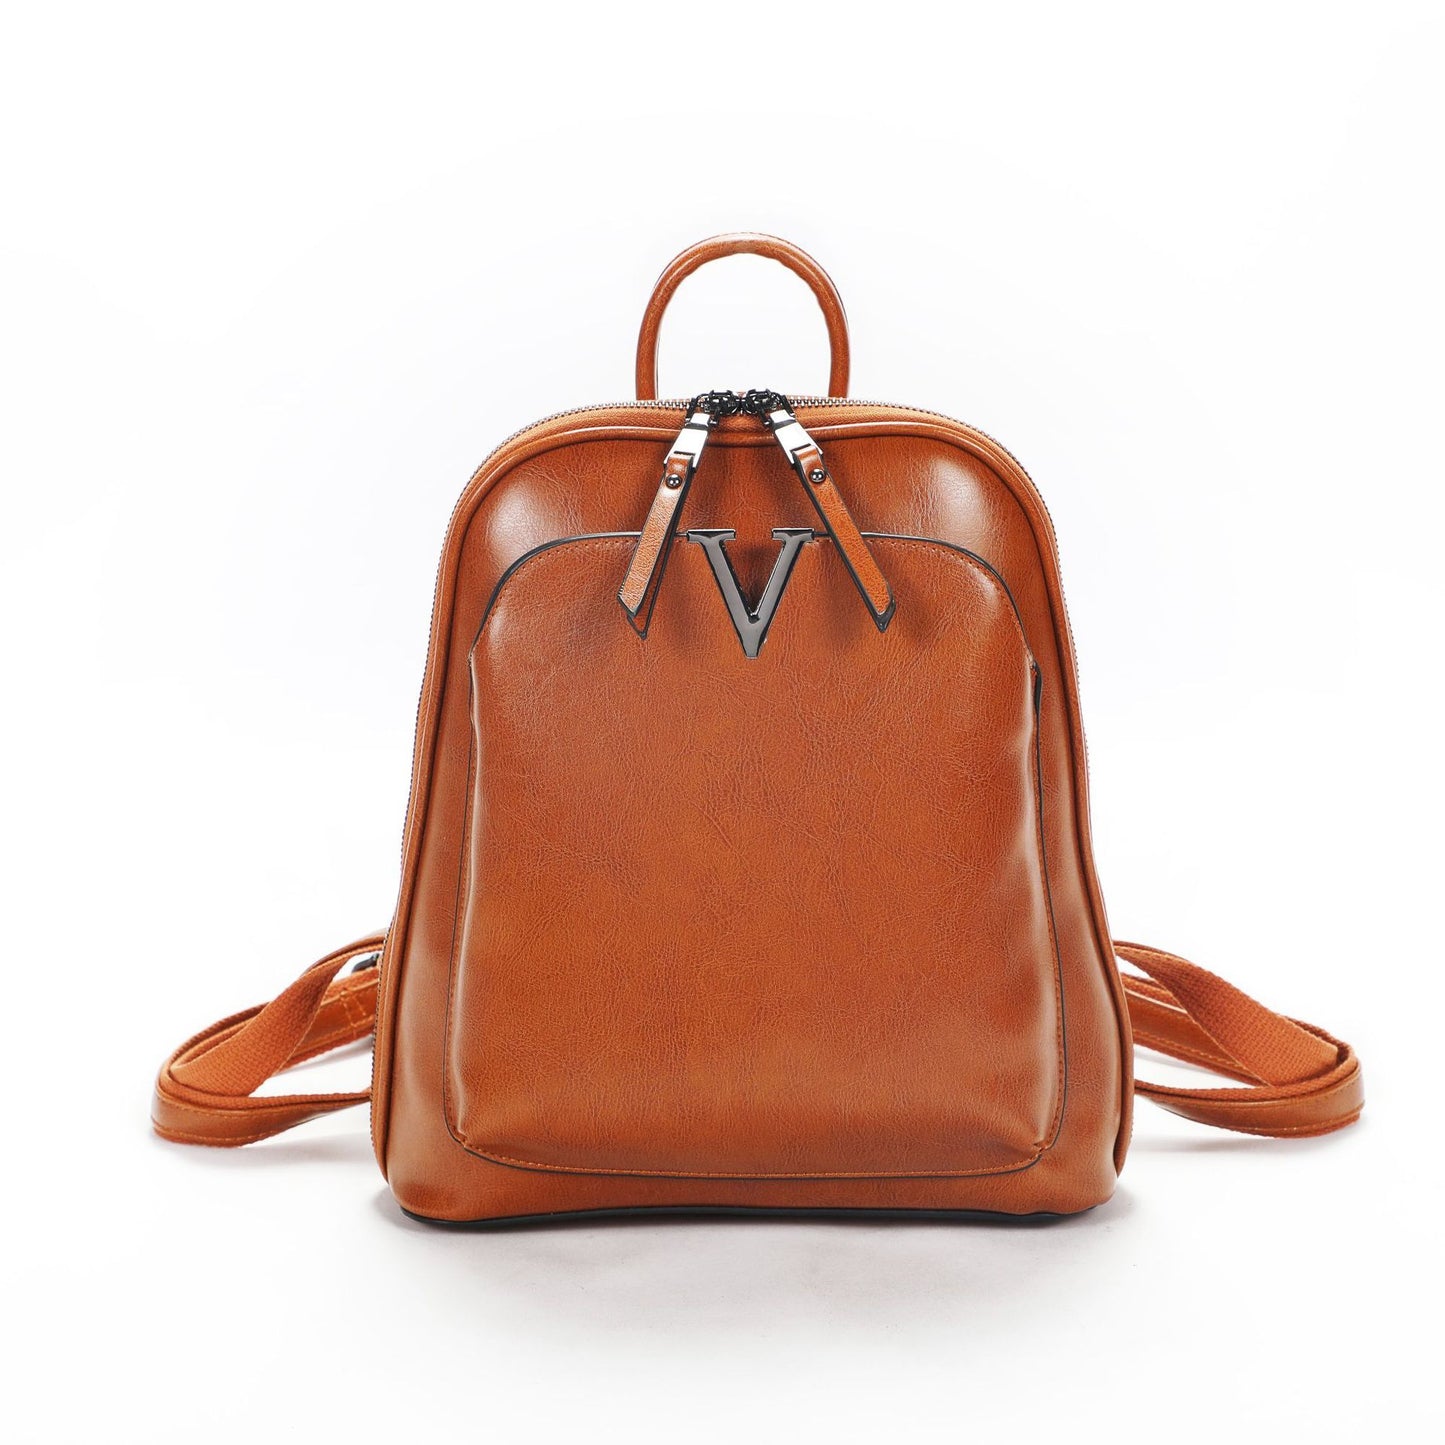 The V Leather Backpack/Purse